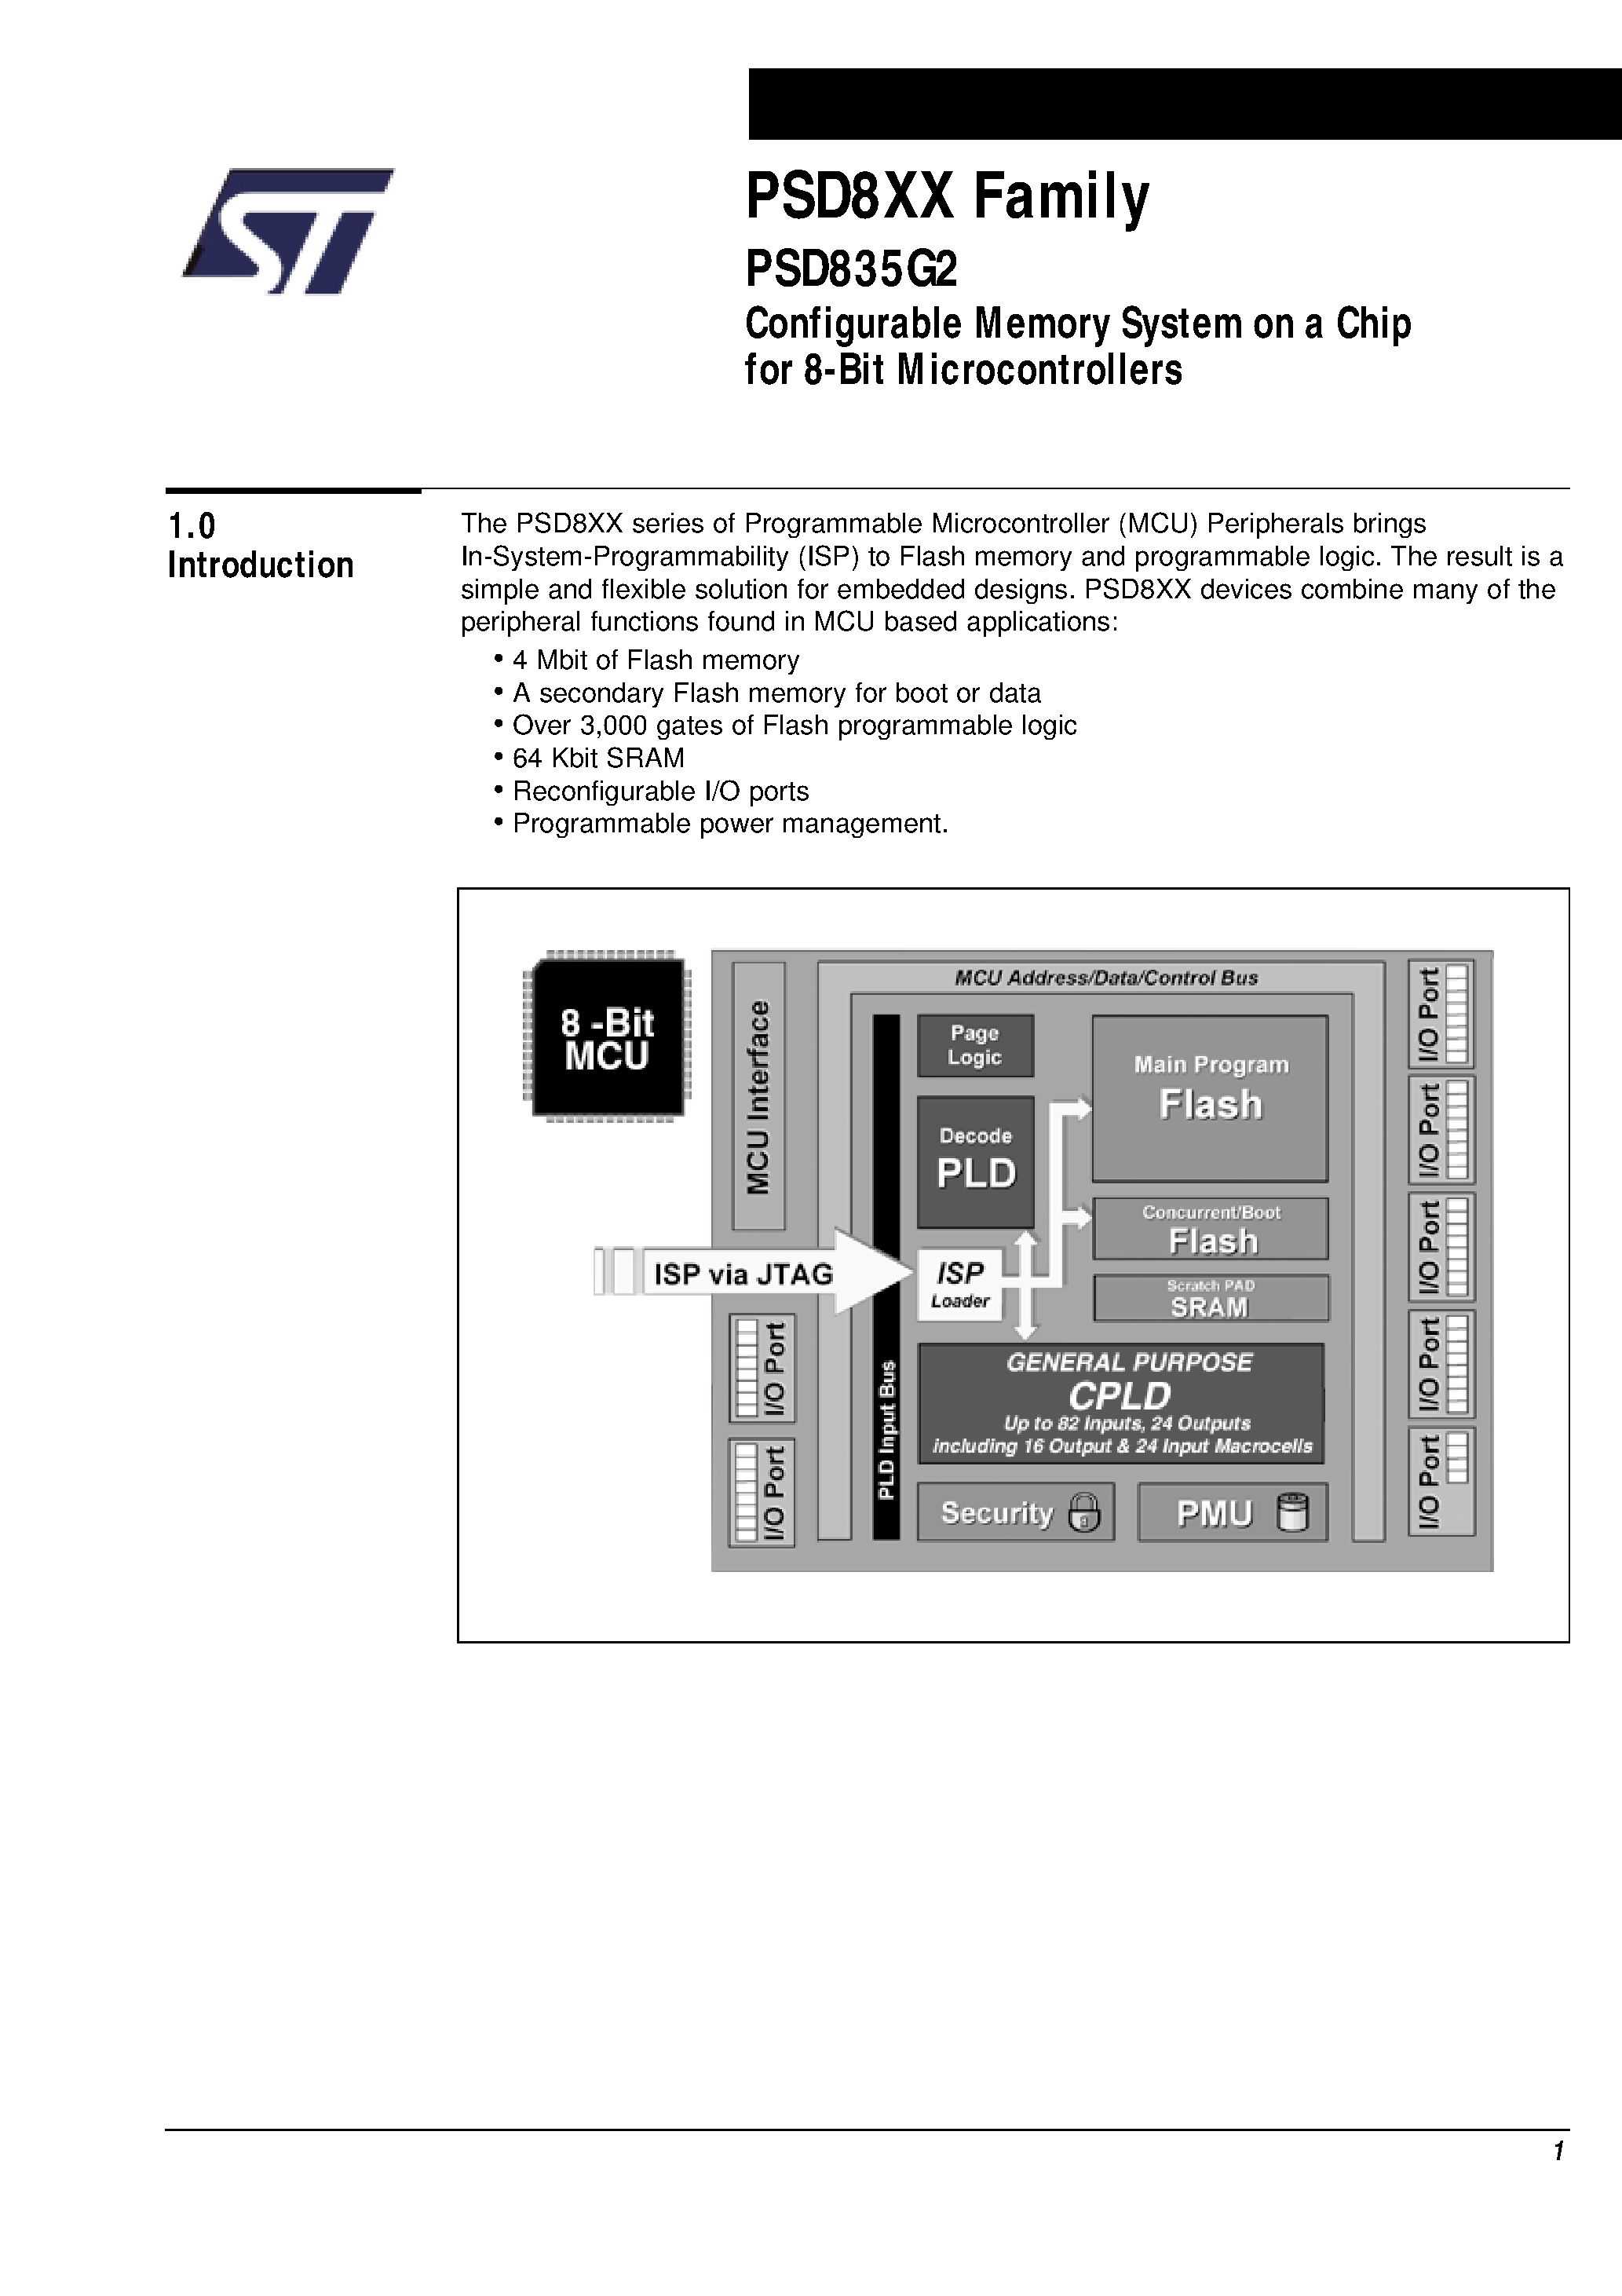 Datasheet PSD835F2V-A-90B81I - Configurable Memory System on a Chip for 8-Bit Microcontrollers page 2